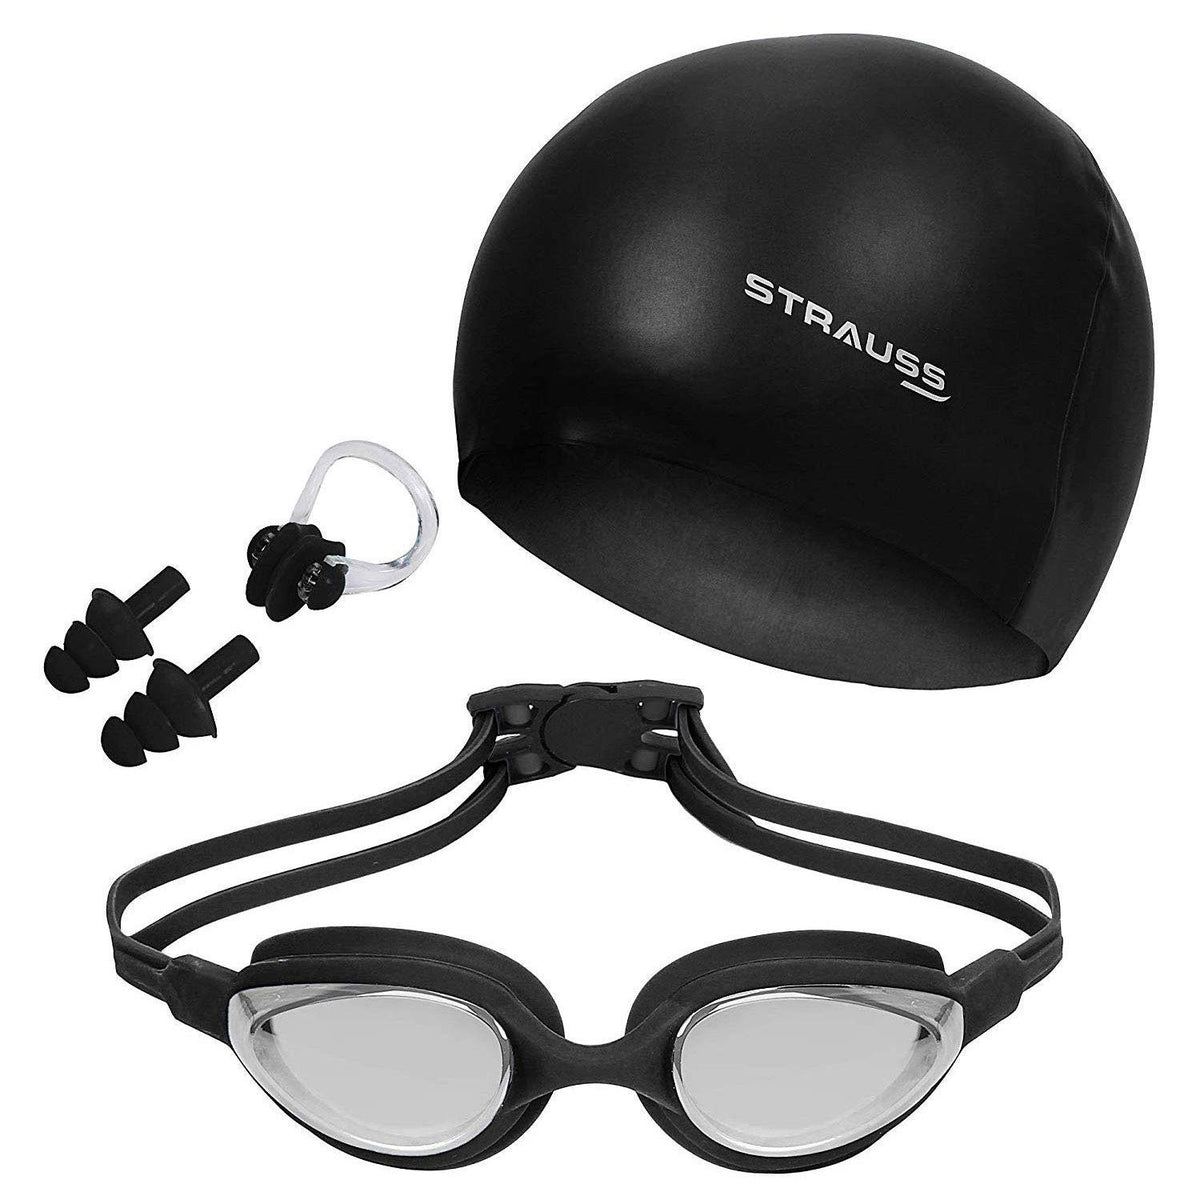 STRAUSS Swimming Goggles Set with UV and Anti Fog Protection | Swimming Kit of Goggles,Cap,Earplug & Nose Plug Set - Ideal for All Age Group | Fully Adjustable | (Black)